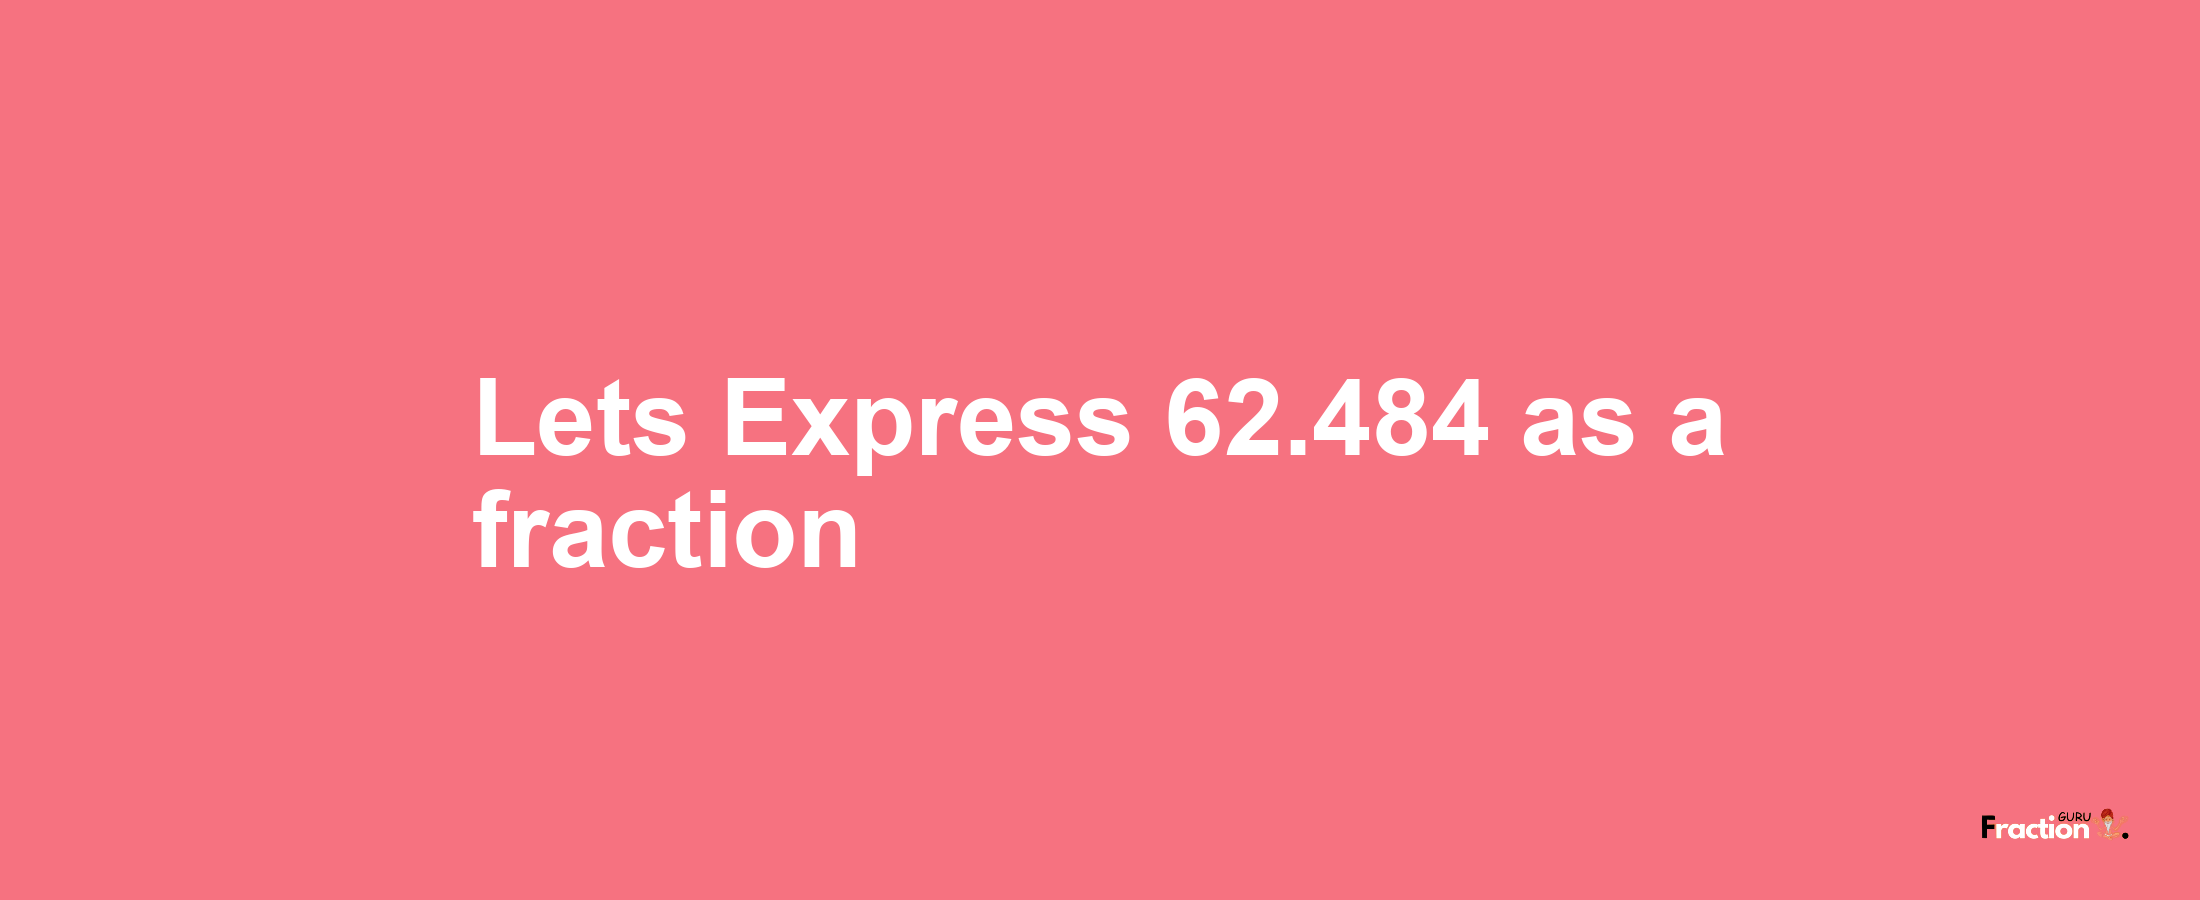 Lets Express 62.484 as afraction